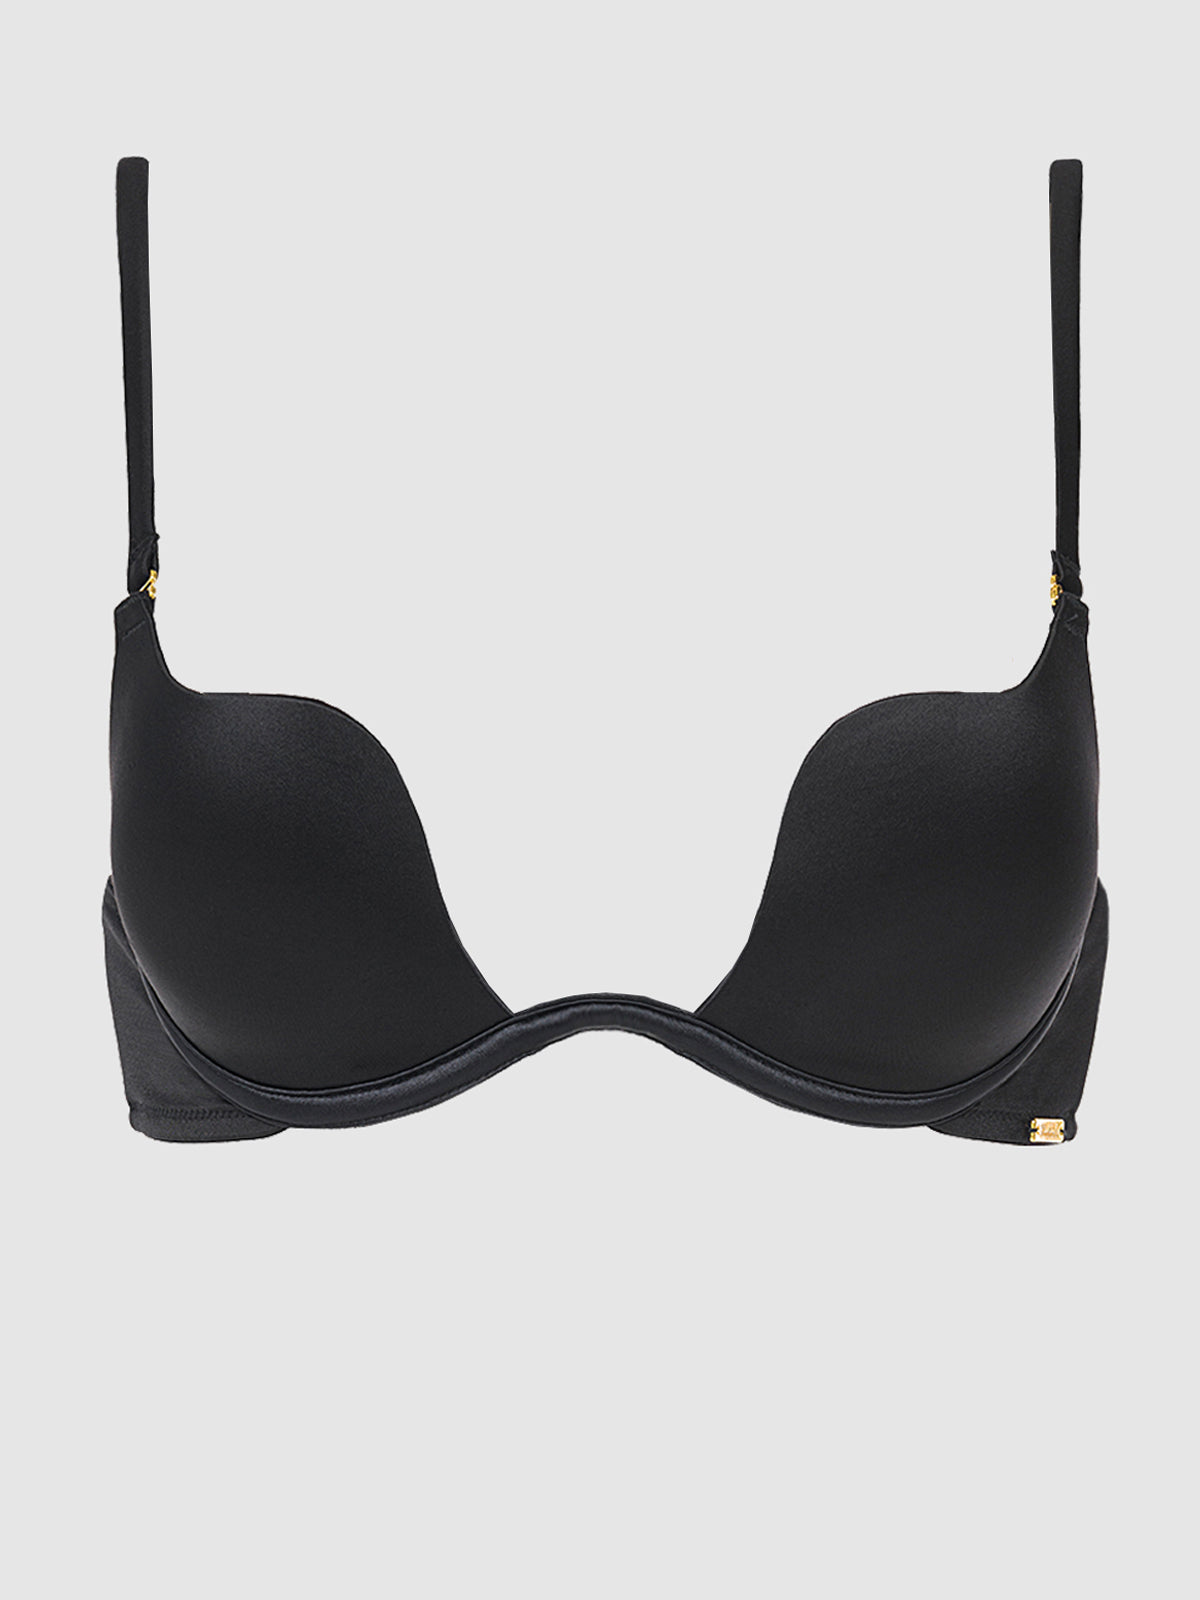 Rising Star Plunge Push Up Bra in Black – Frederick's of Hollywood